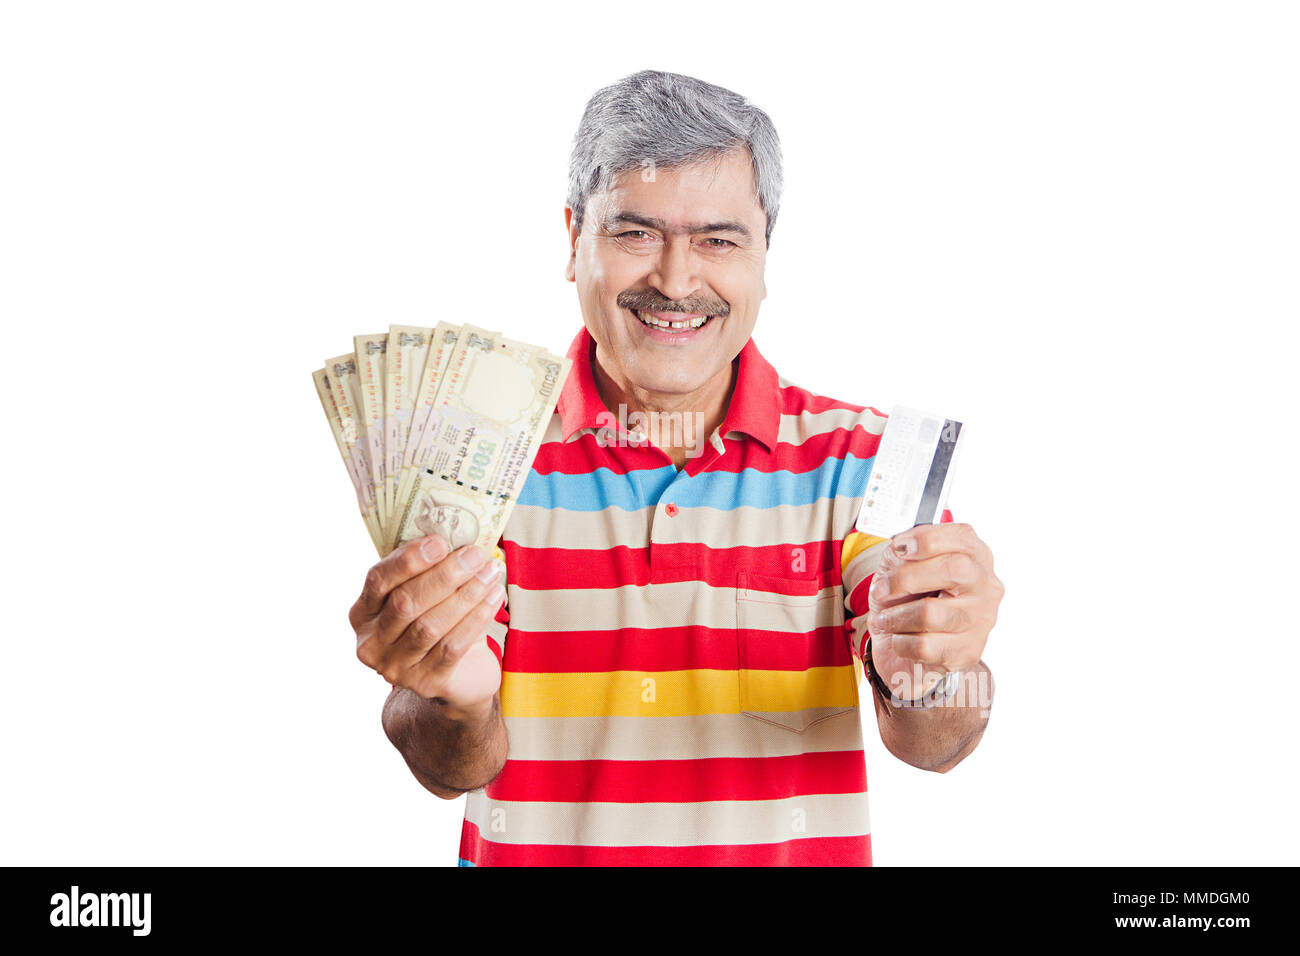 One Old man Holding Debit-Card With Money Rupee-Banknotes, cashless economy Stock Photo